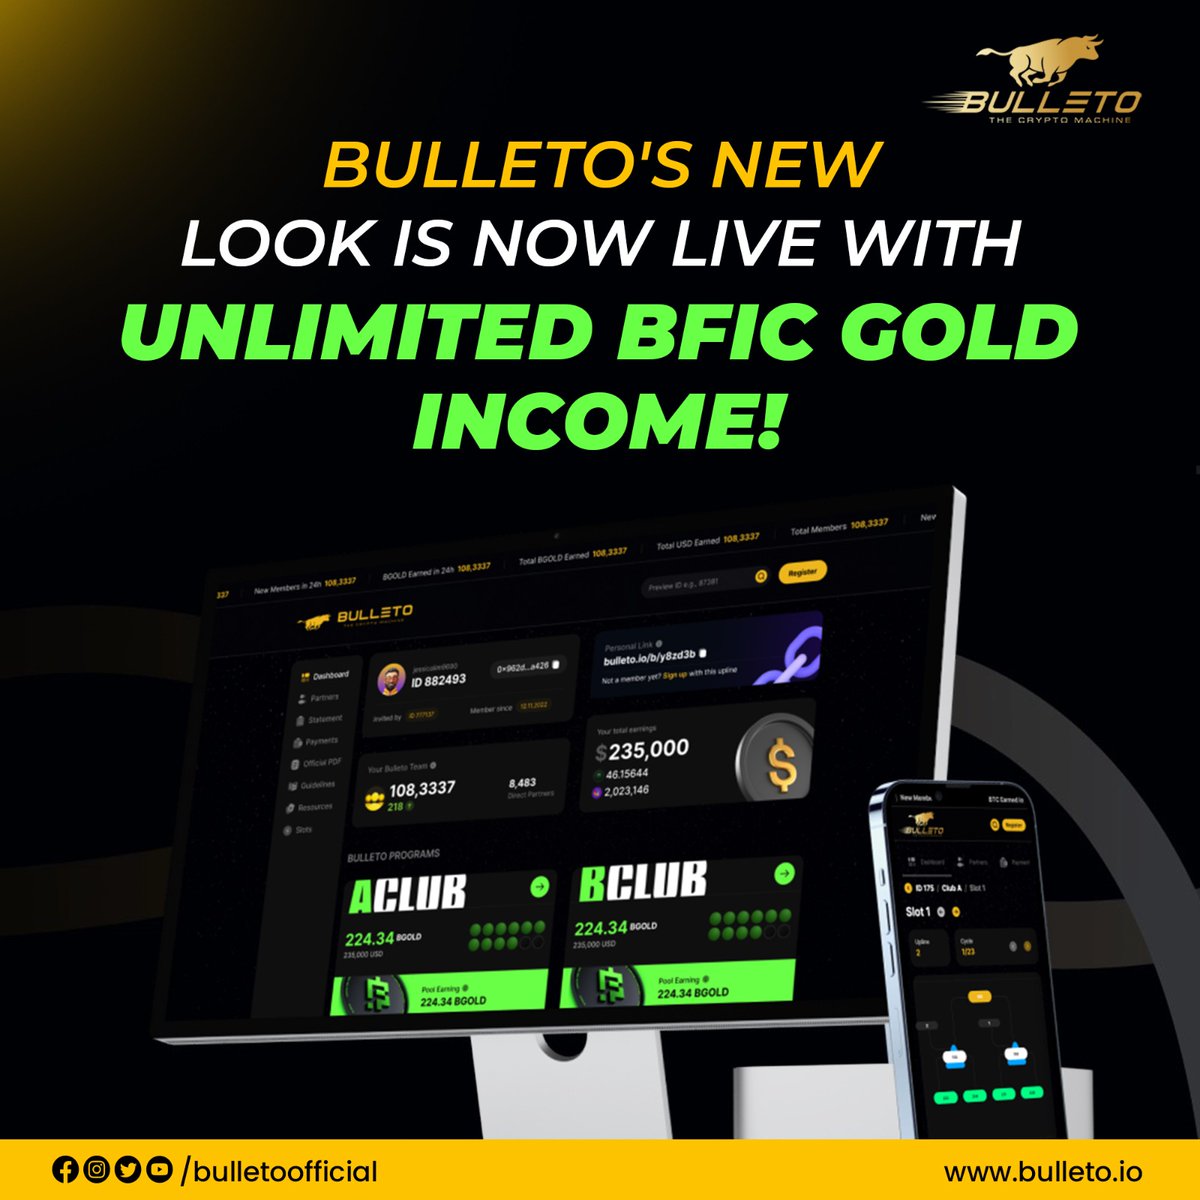 The wait is over!!
Bulleto is Now LIVE with limitless BFICGOLD Income! 🚀

#Bulleto #BulletoCommunity #BFICGold #BFICGoldincome #BFICCommunity #BFICGoldCommunity #TheCryptoMachine #NowLIVE #Changeyourlife #earnmoneyonline #EarnwithBulleto #free #Live